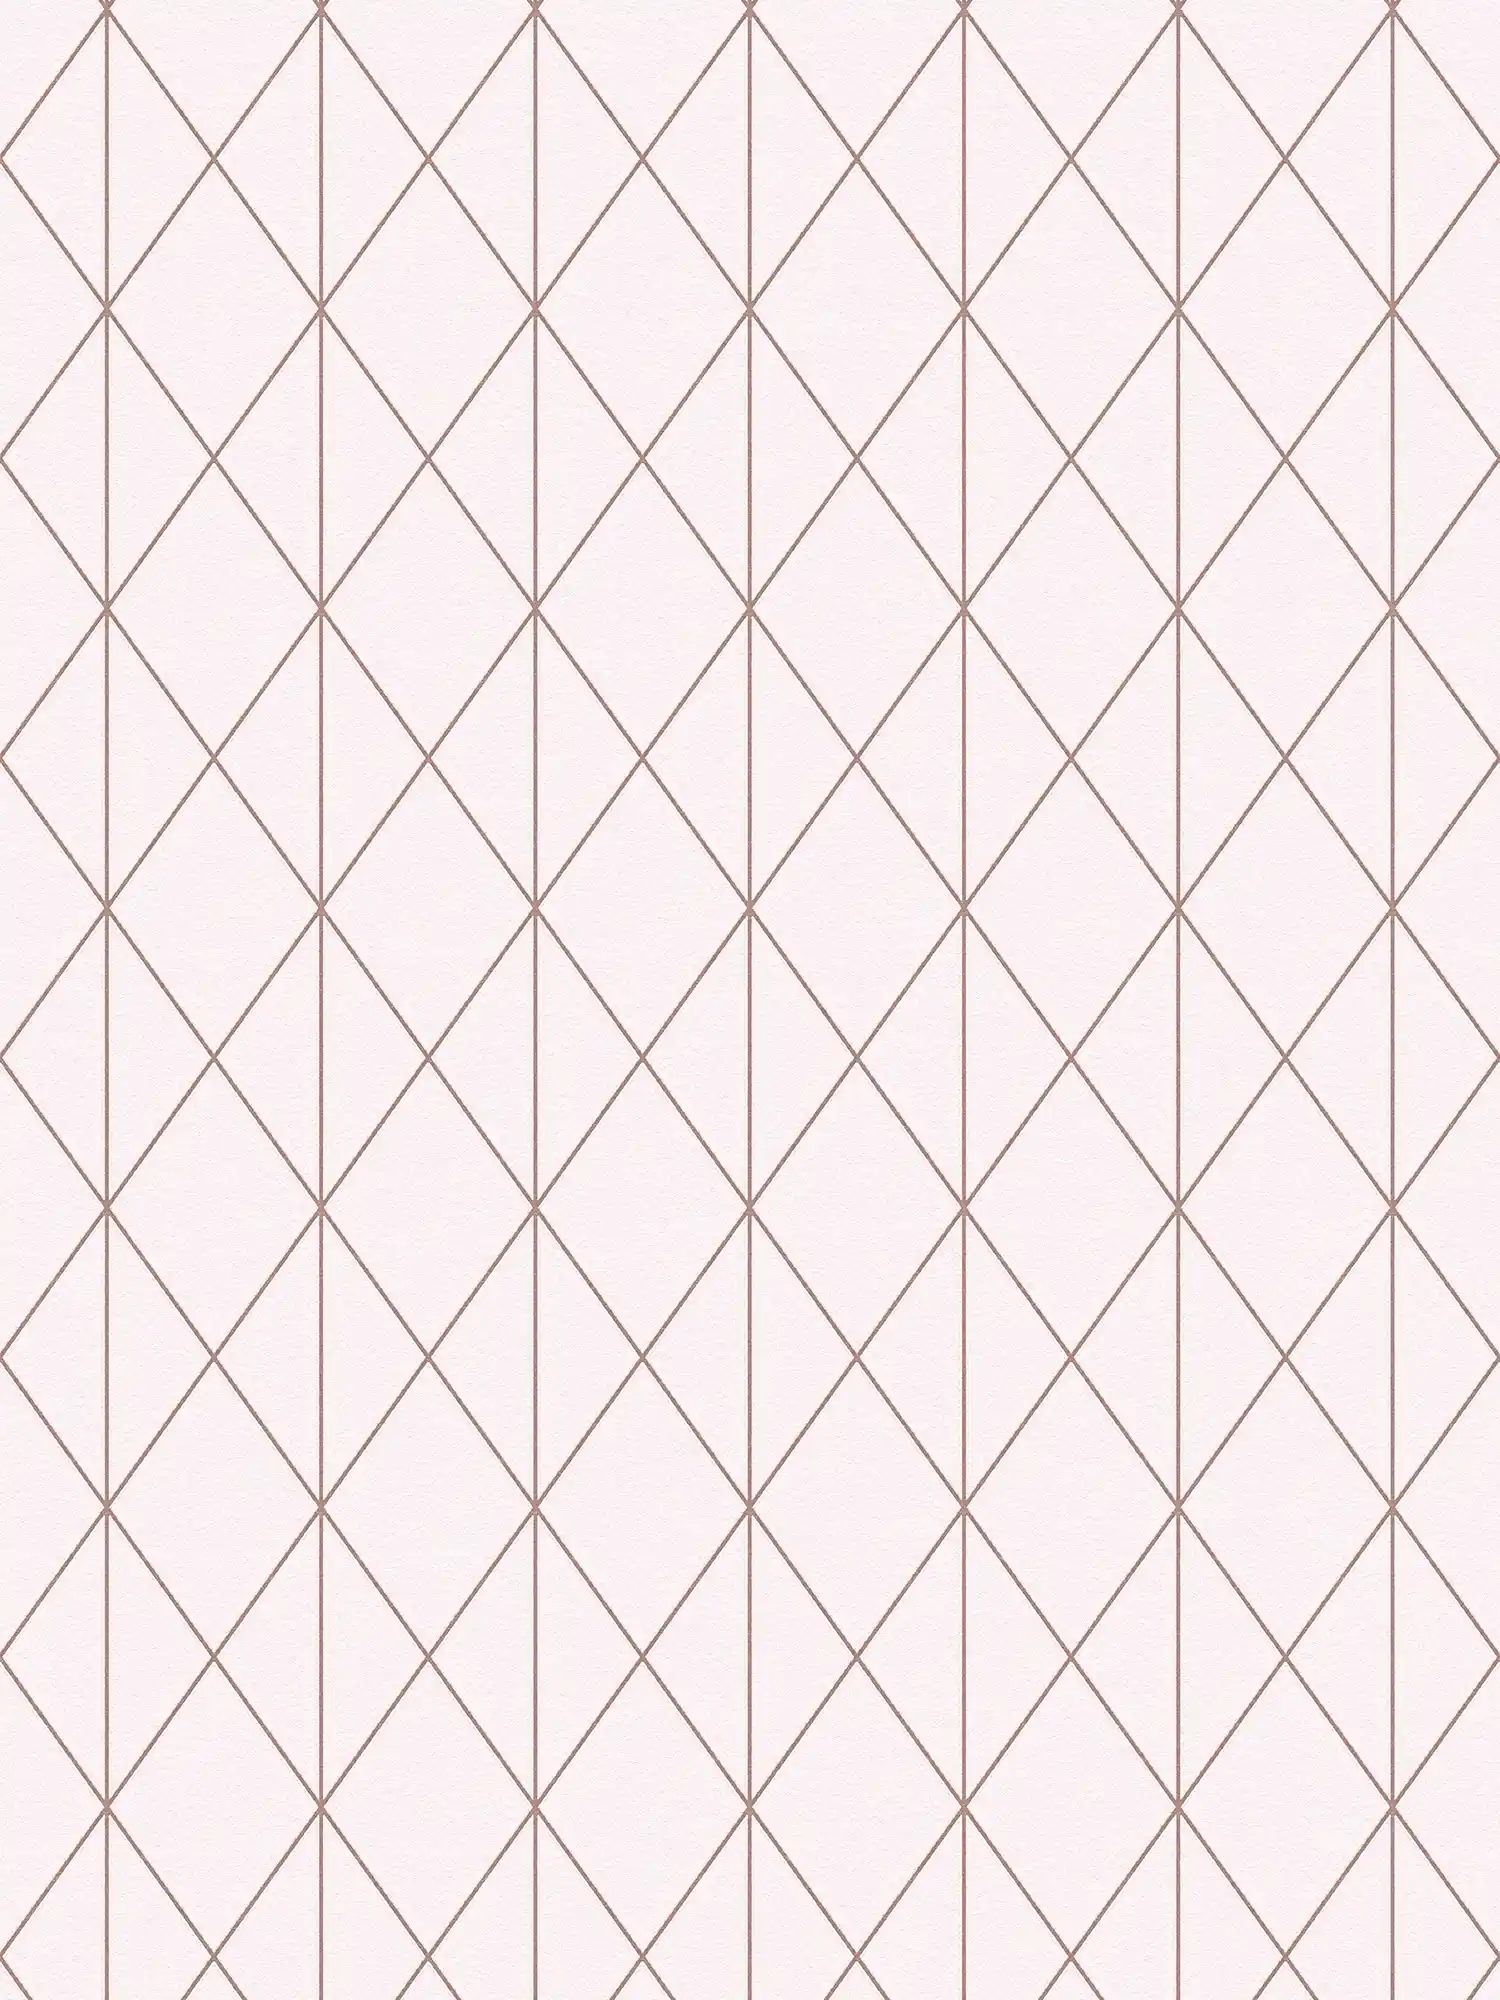 Graphic design wallpaper with metallic accent - pink
